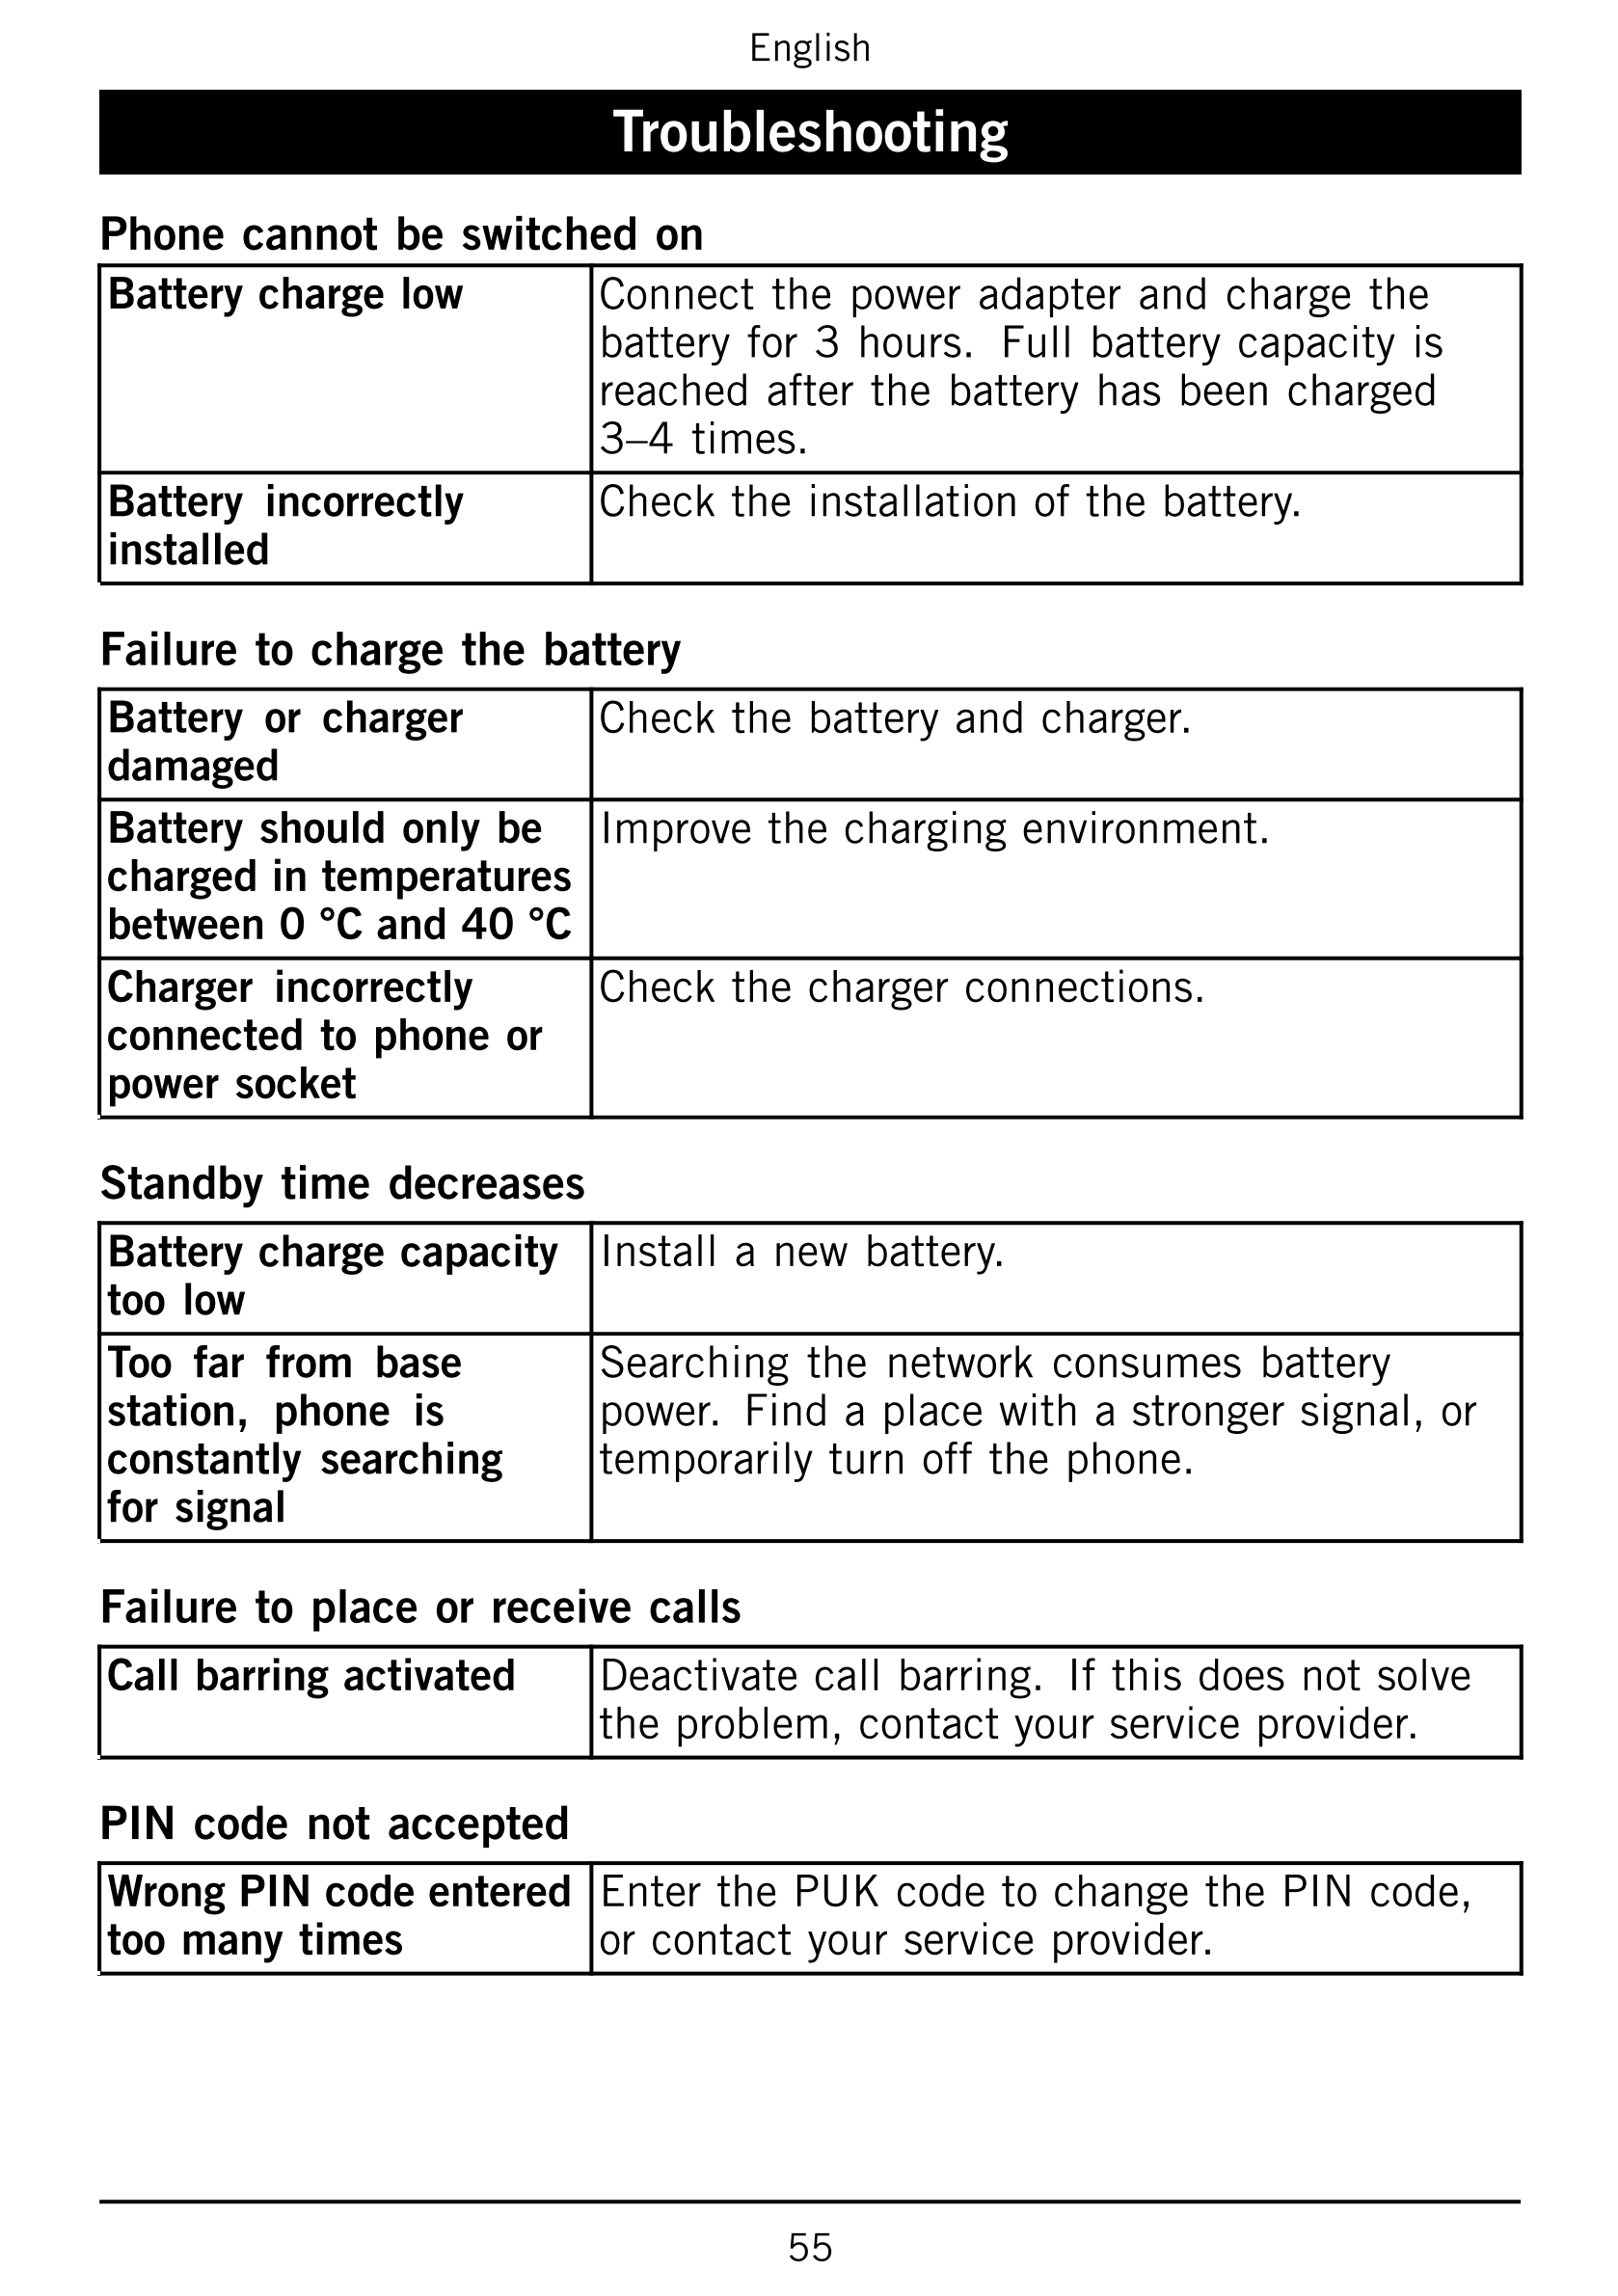 English
Troubleshooting
Phone cannot be switched on
Battery charge low Connect the power adapter and charge the
battery for 3 ho